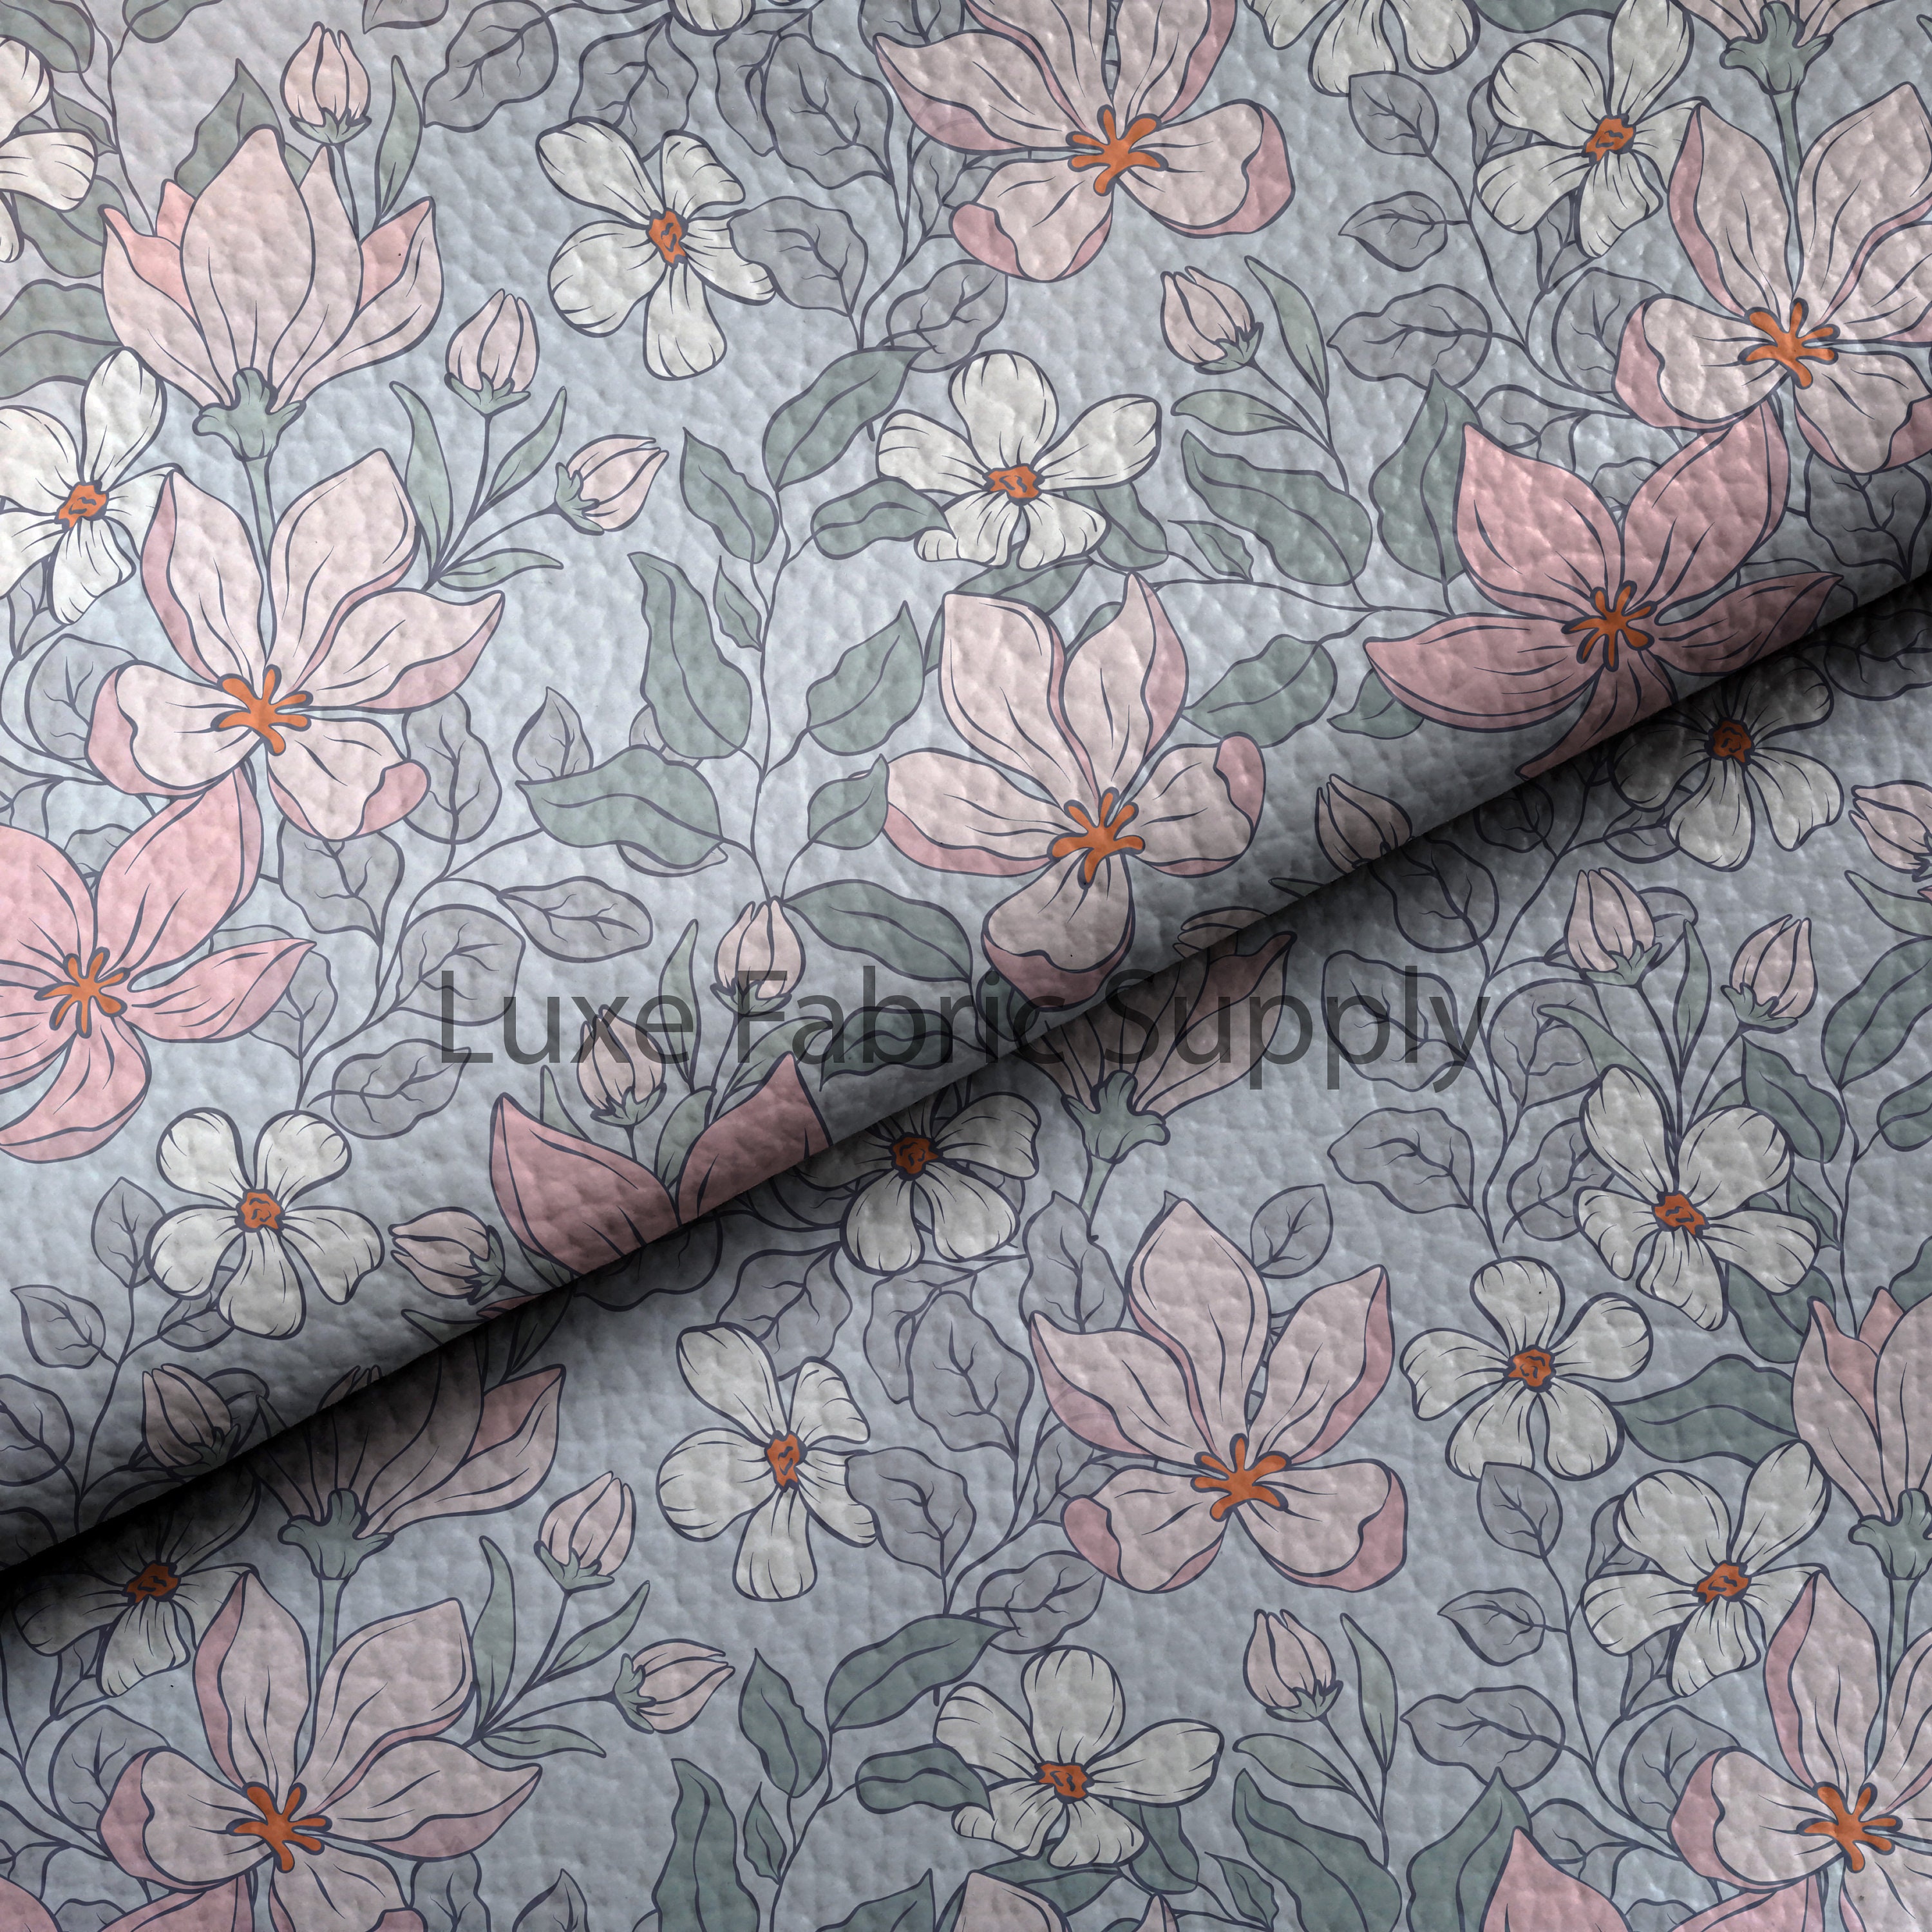  Funcolor Flower Faux Leather Roll:12X53 Inch Yellow Print  Leather Sheets Floral Patterned Leather Rolls Synthetic Material Thin PU  Solid Leatherette Sheet for Sewing Crafts Making Bows DIY Handmade.